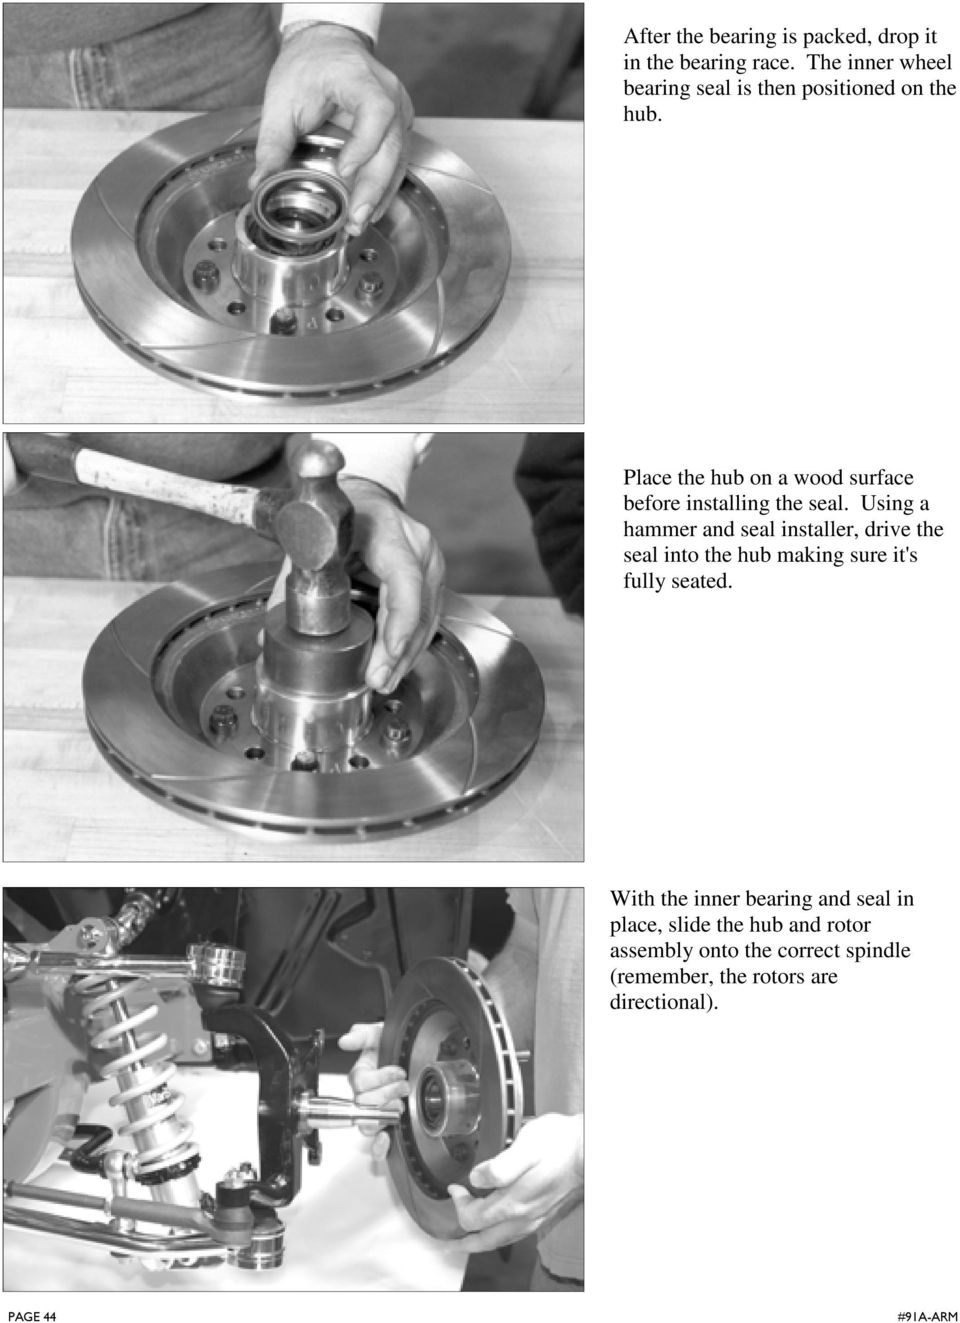 Place the hub on a wood surface before installing the seal.